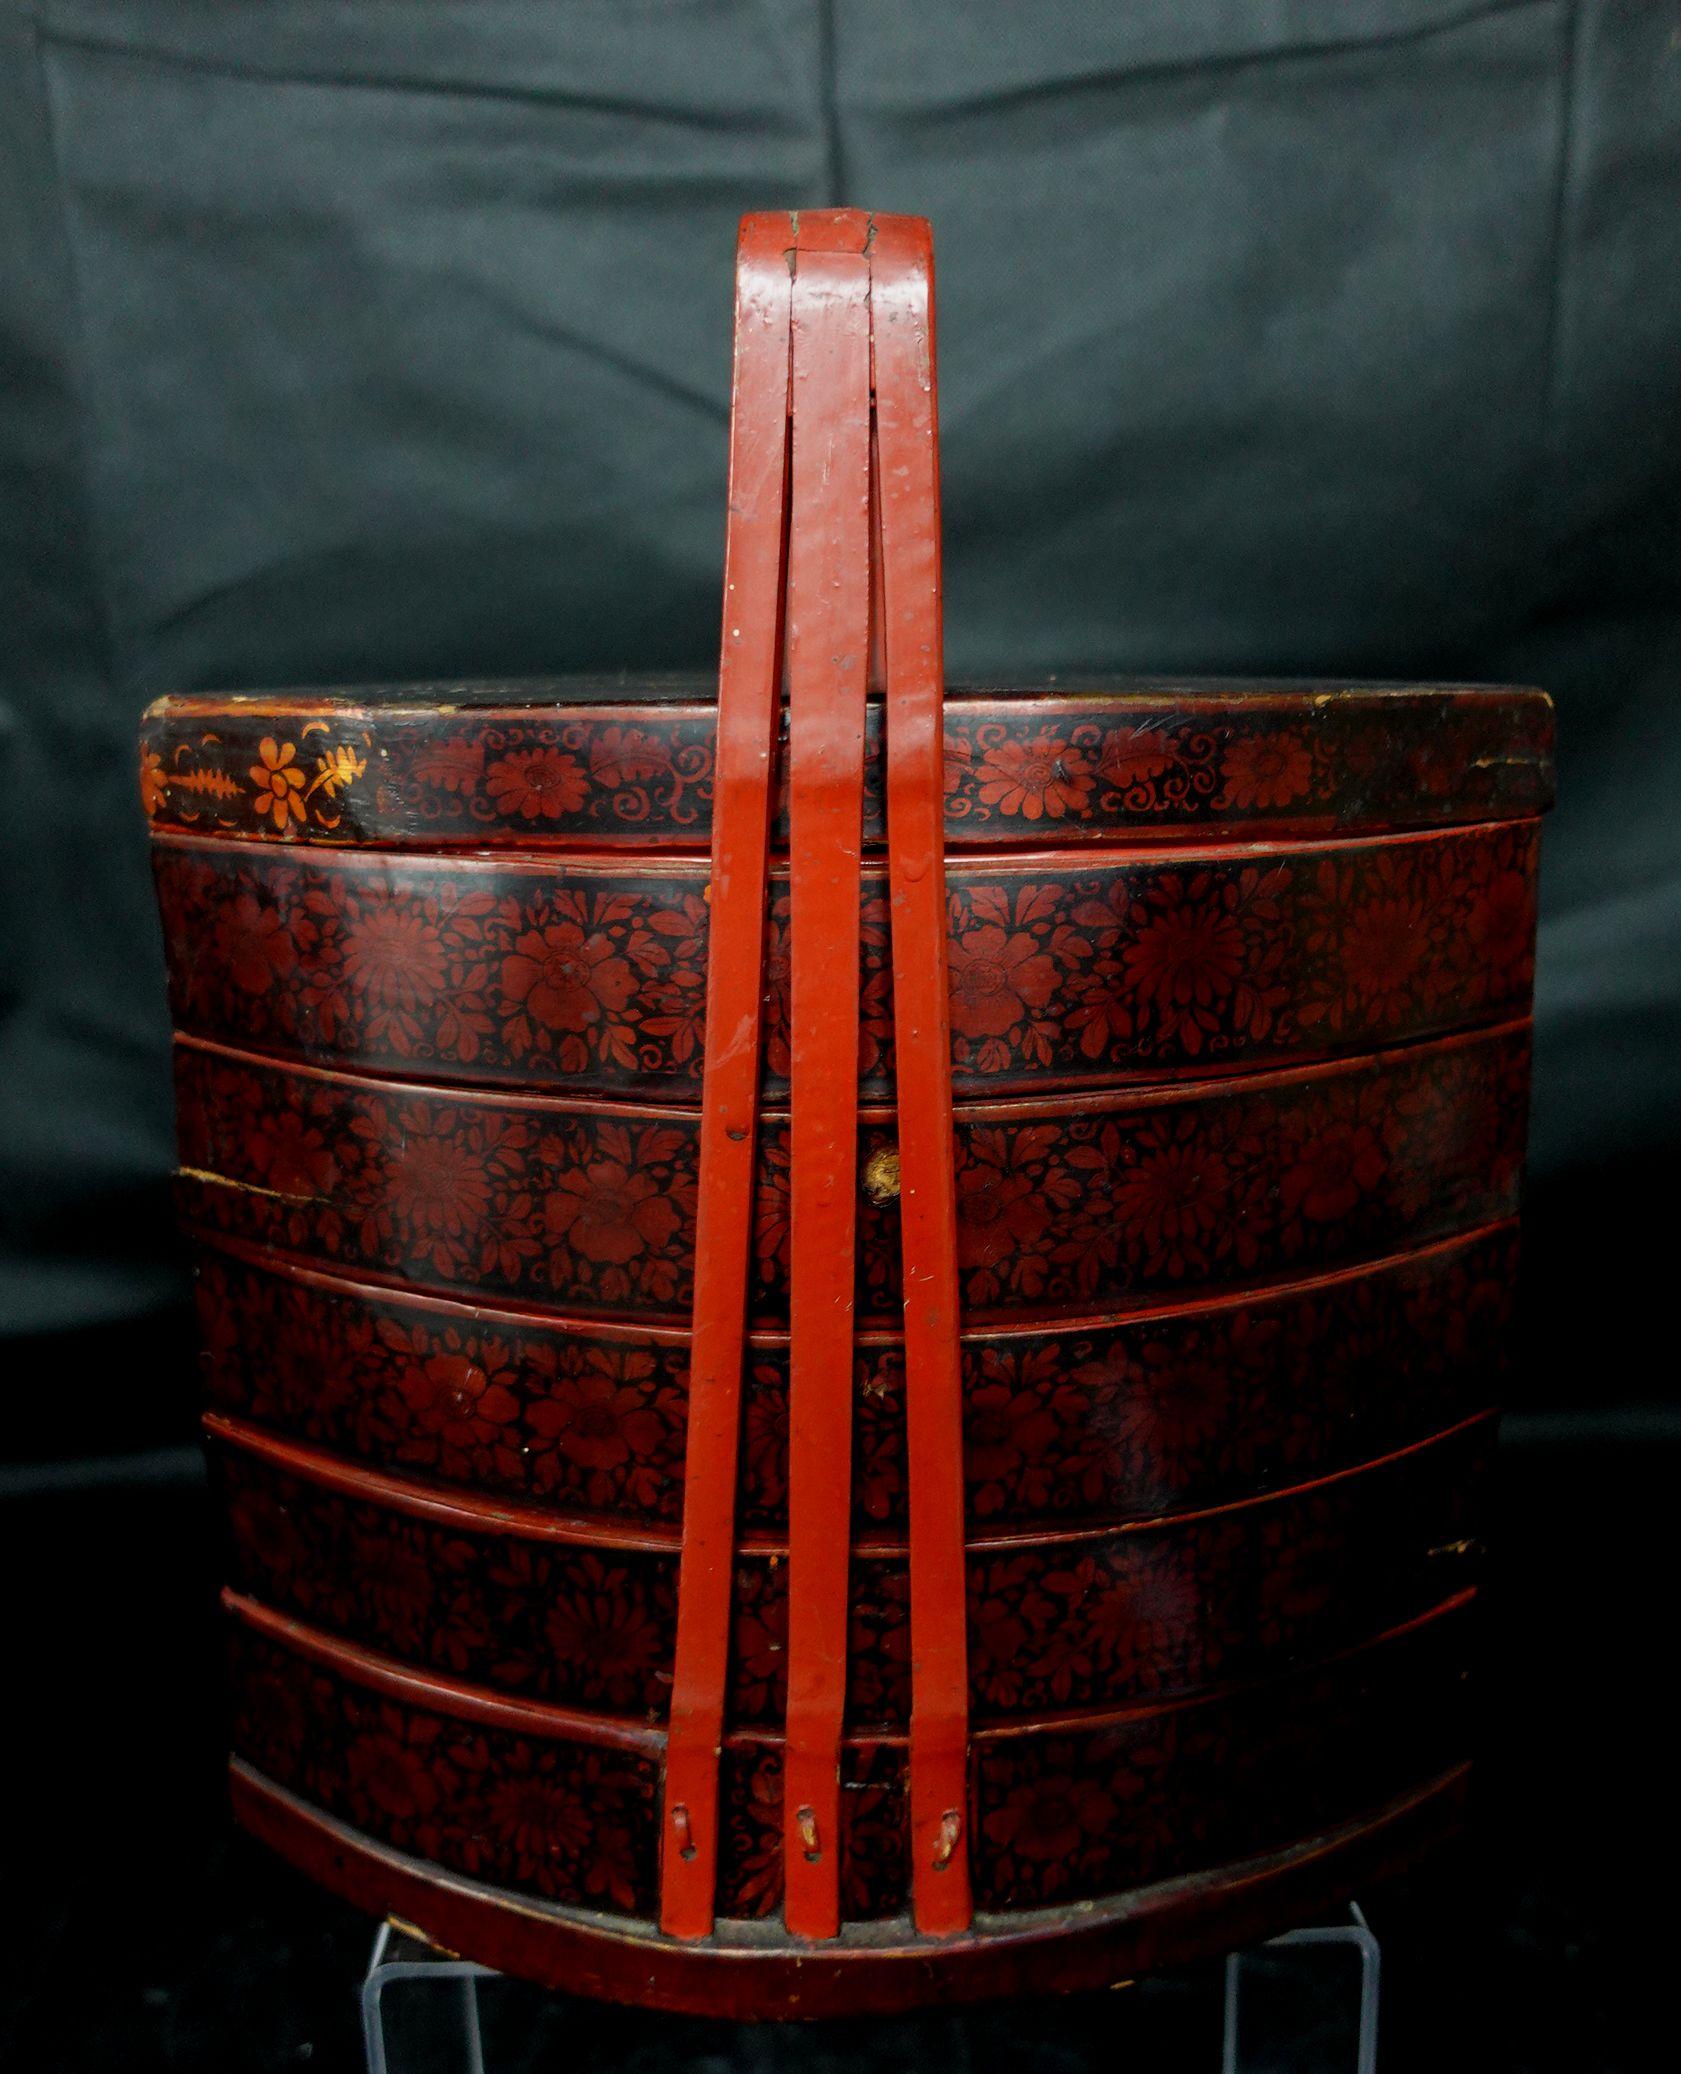 Red/Black-lacquered Fan-shape Five-case Lunch Box, China, 19th century, with three bamboo splint handles converging to form a broad strap handle over the top, decorated with chrysanthemum flower heads.